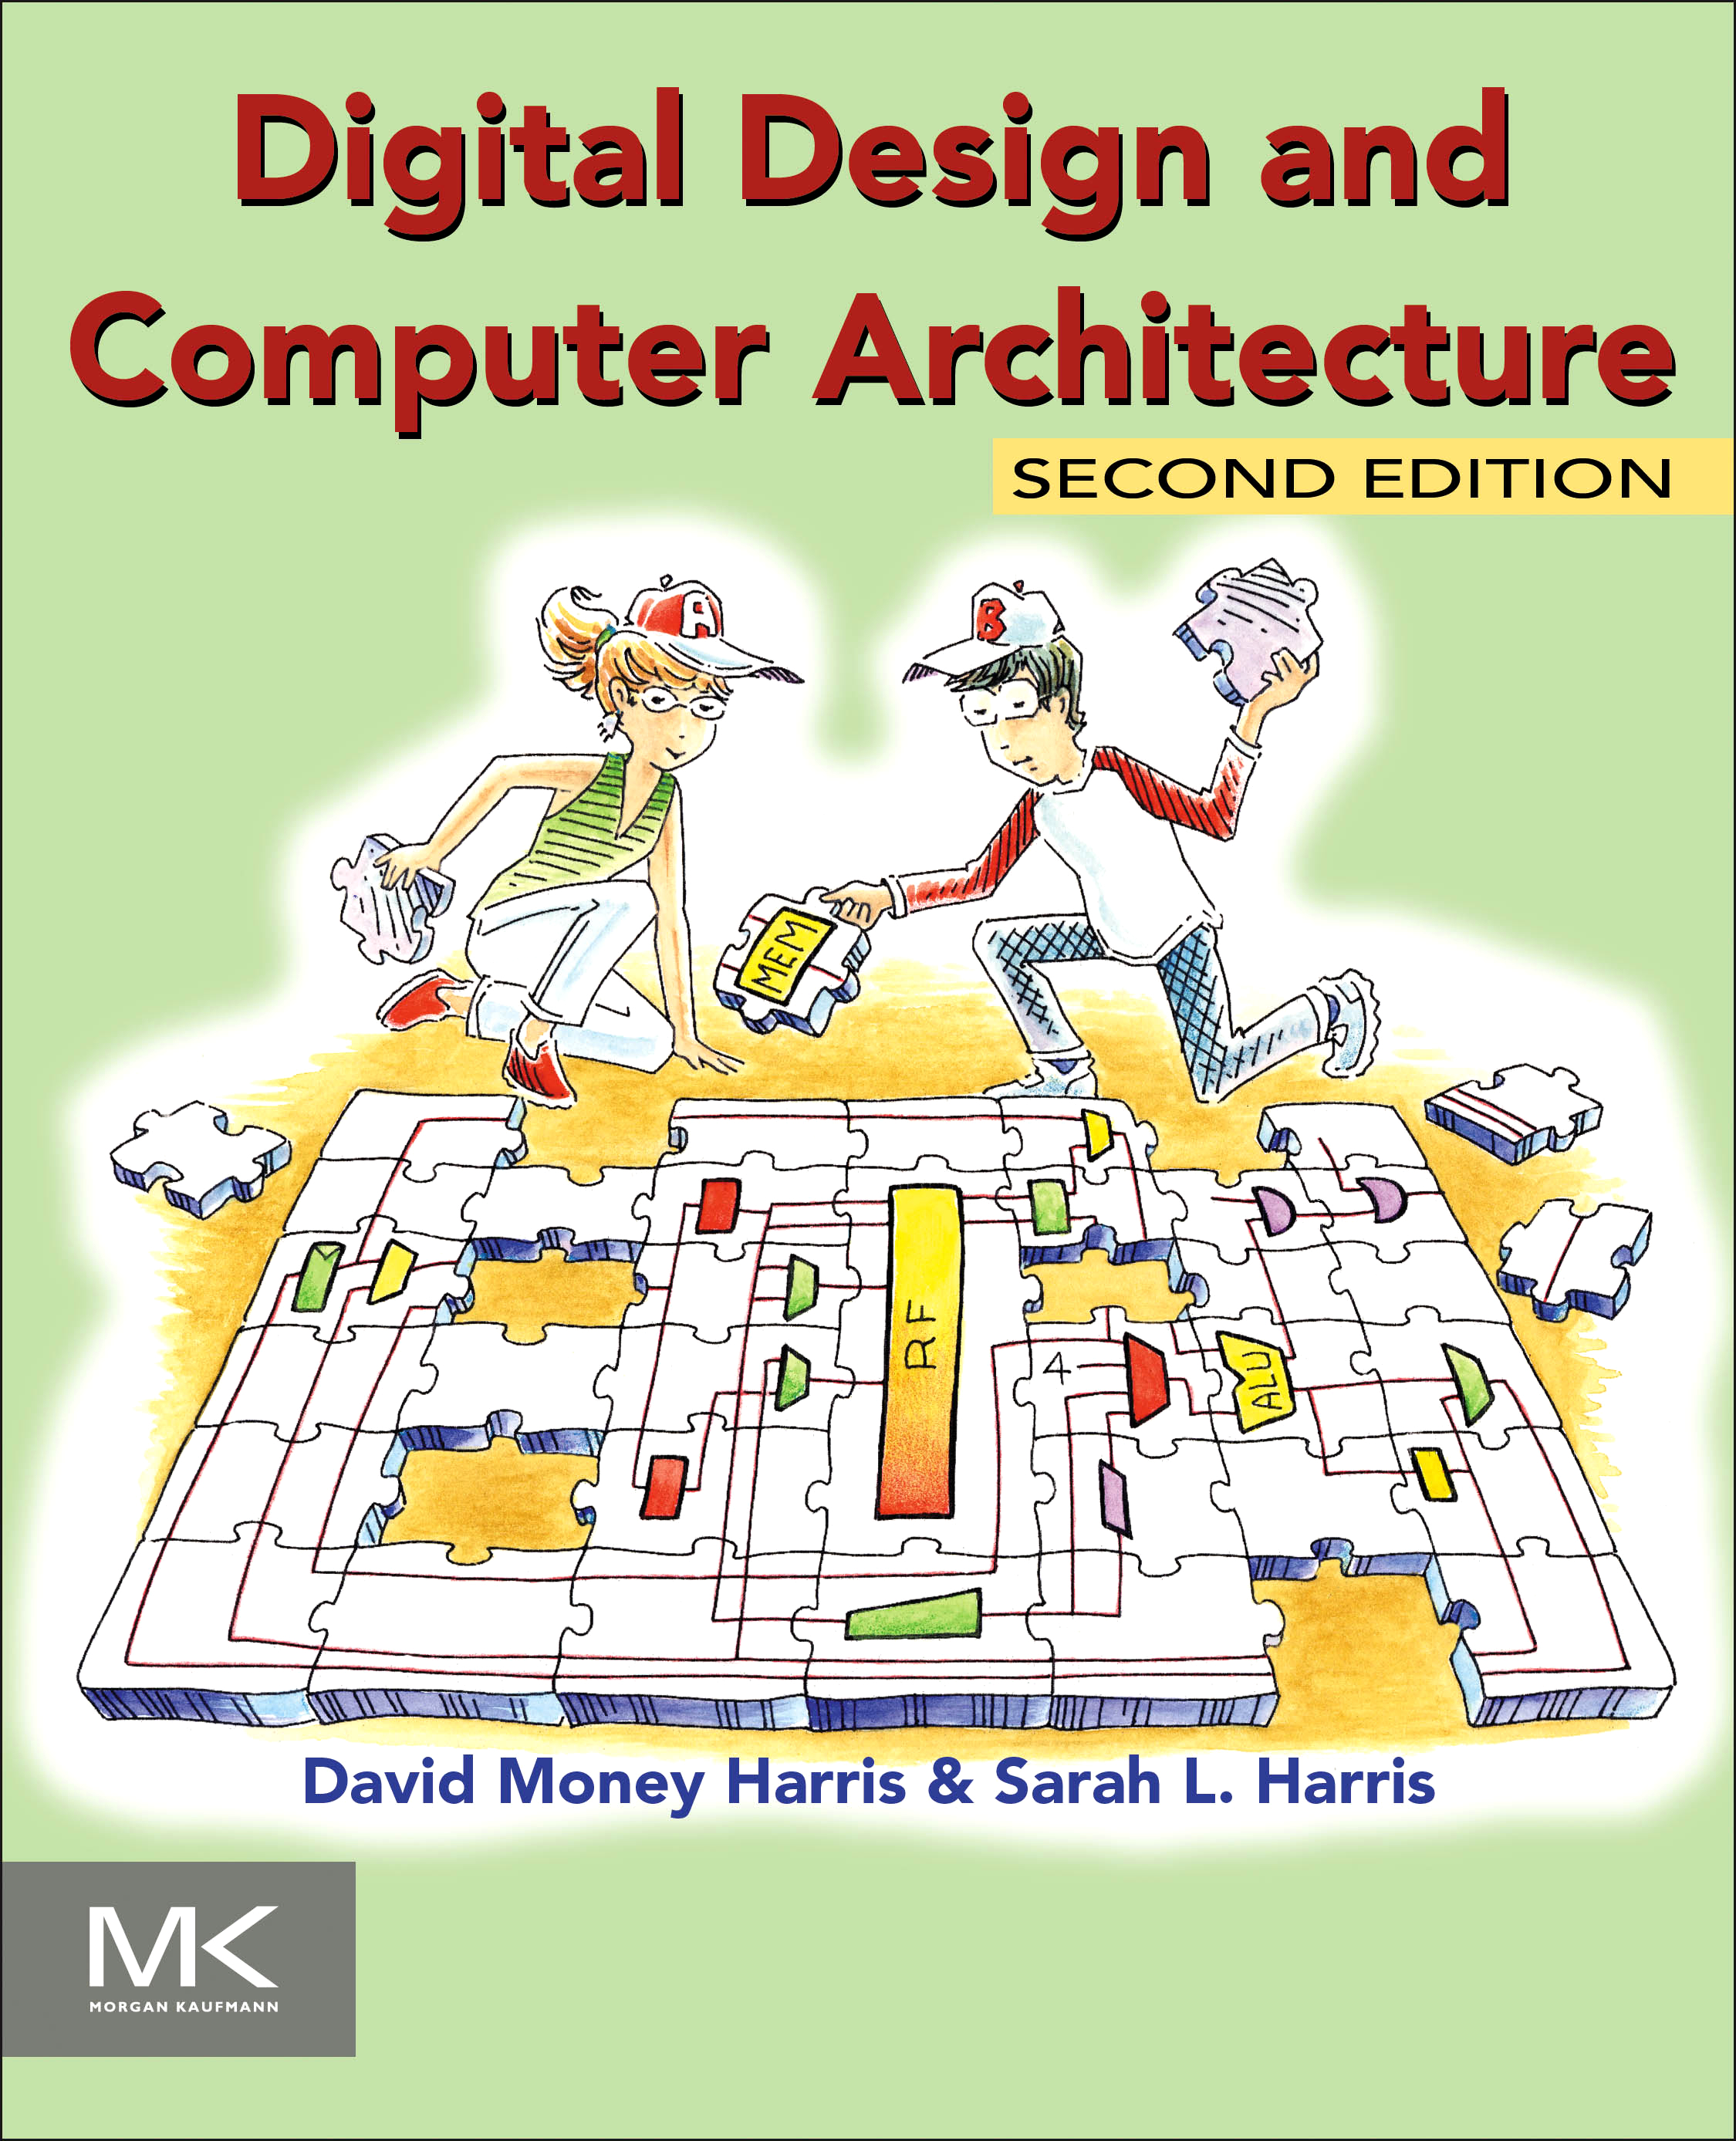 DDCA second edition cover